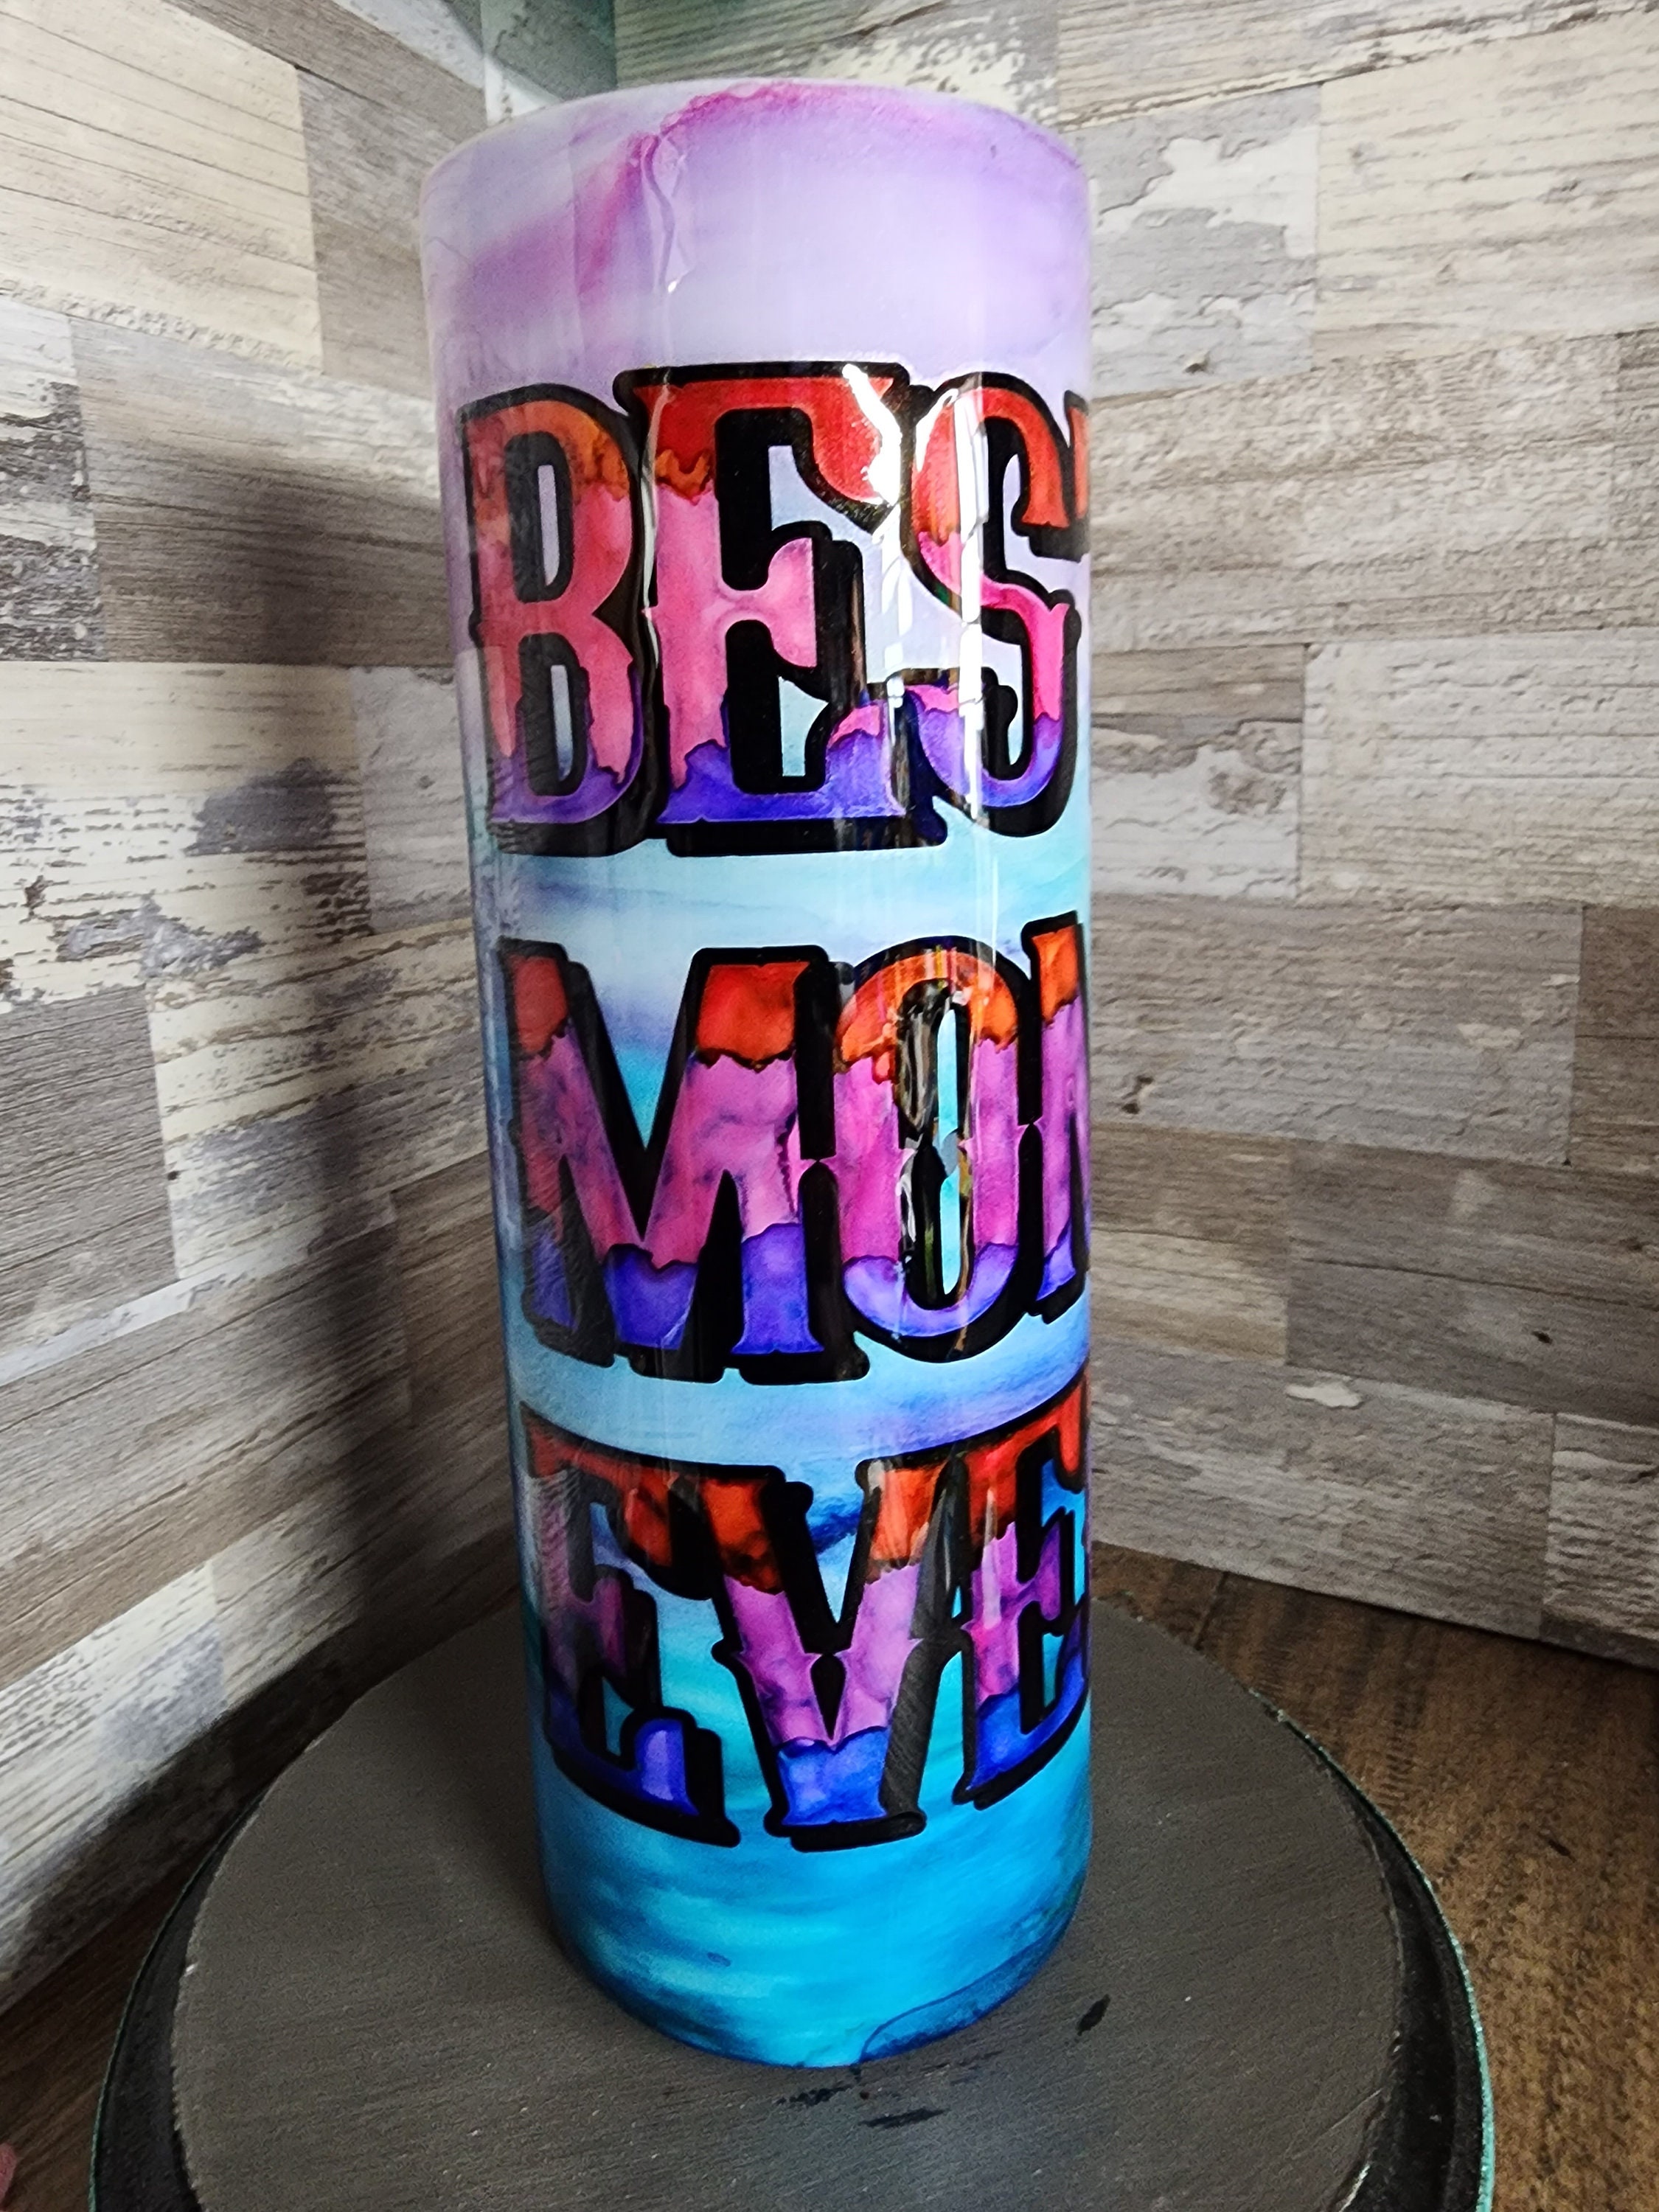 Best Mom Ever 20 oz Tumbler – Sips & Gifts